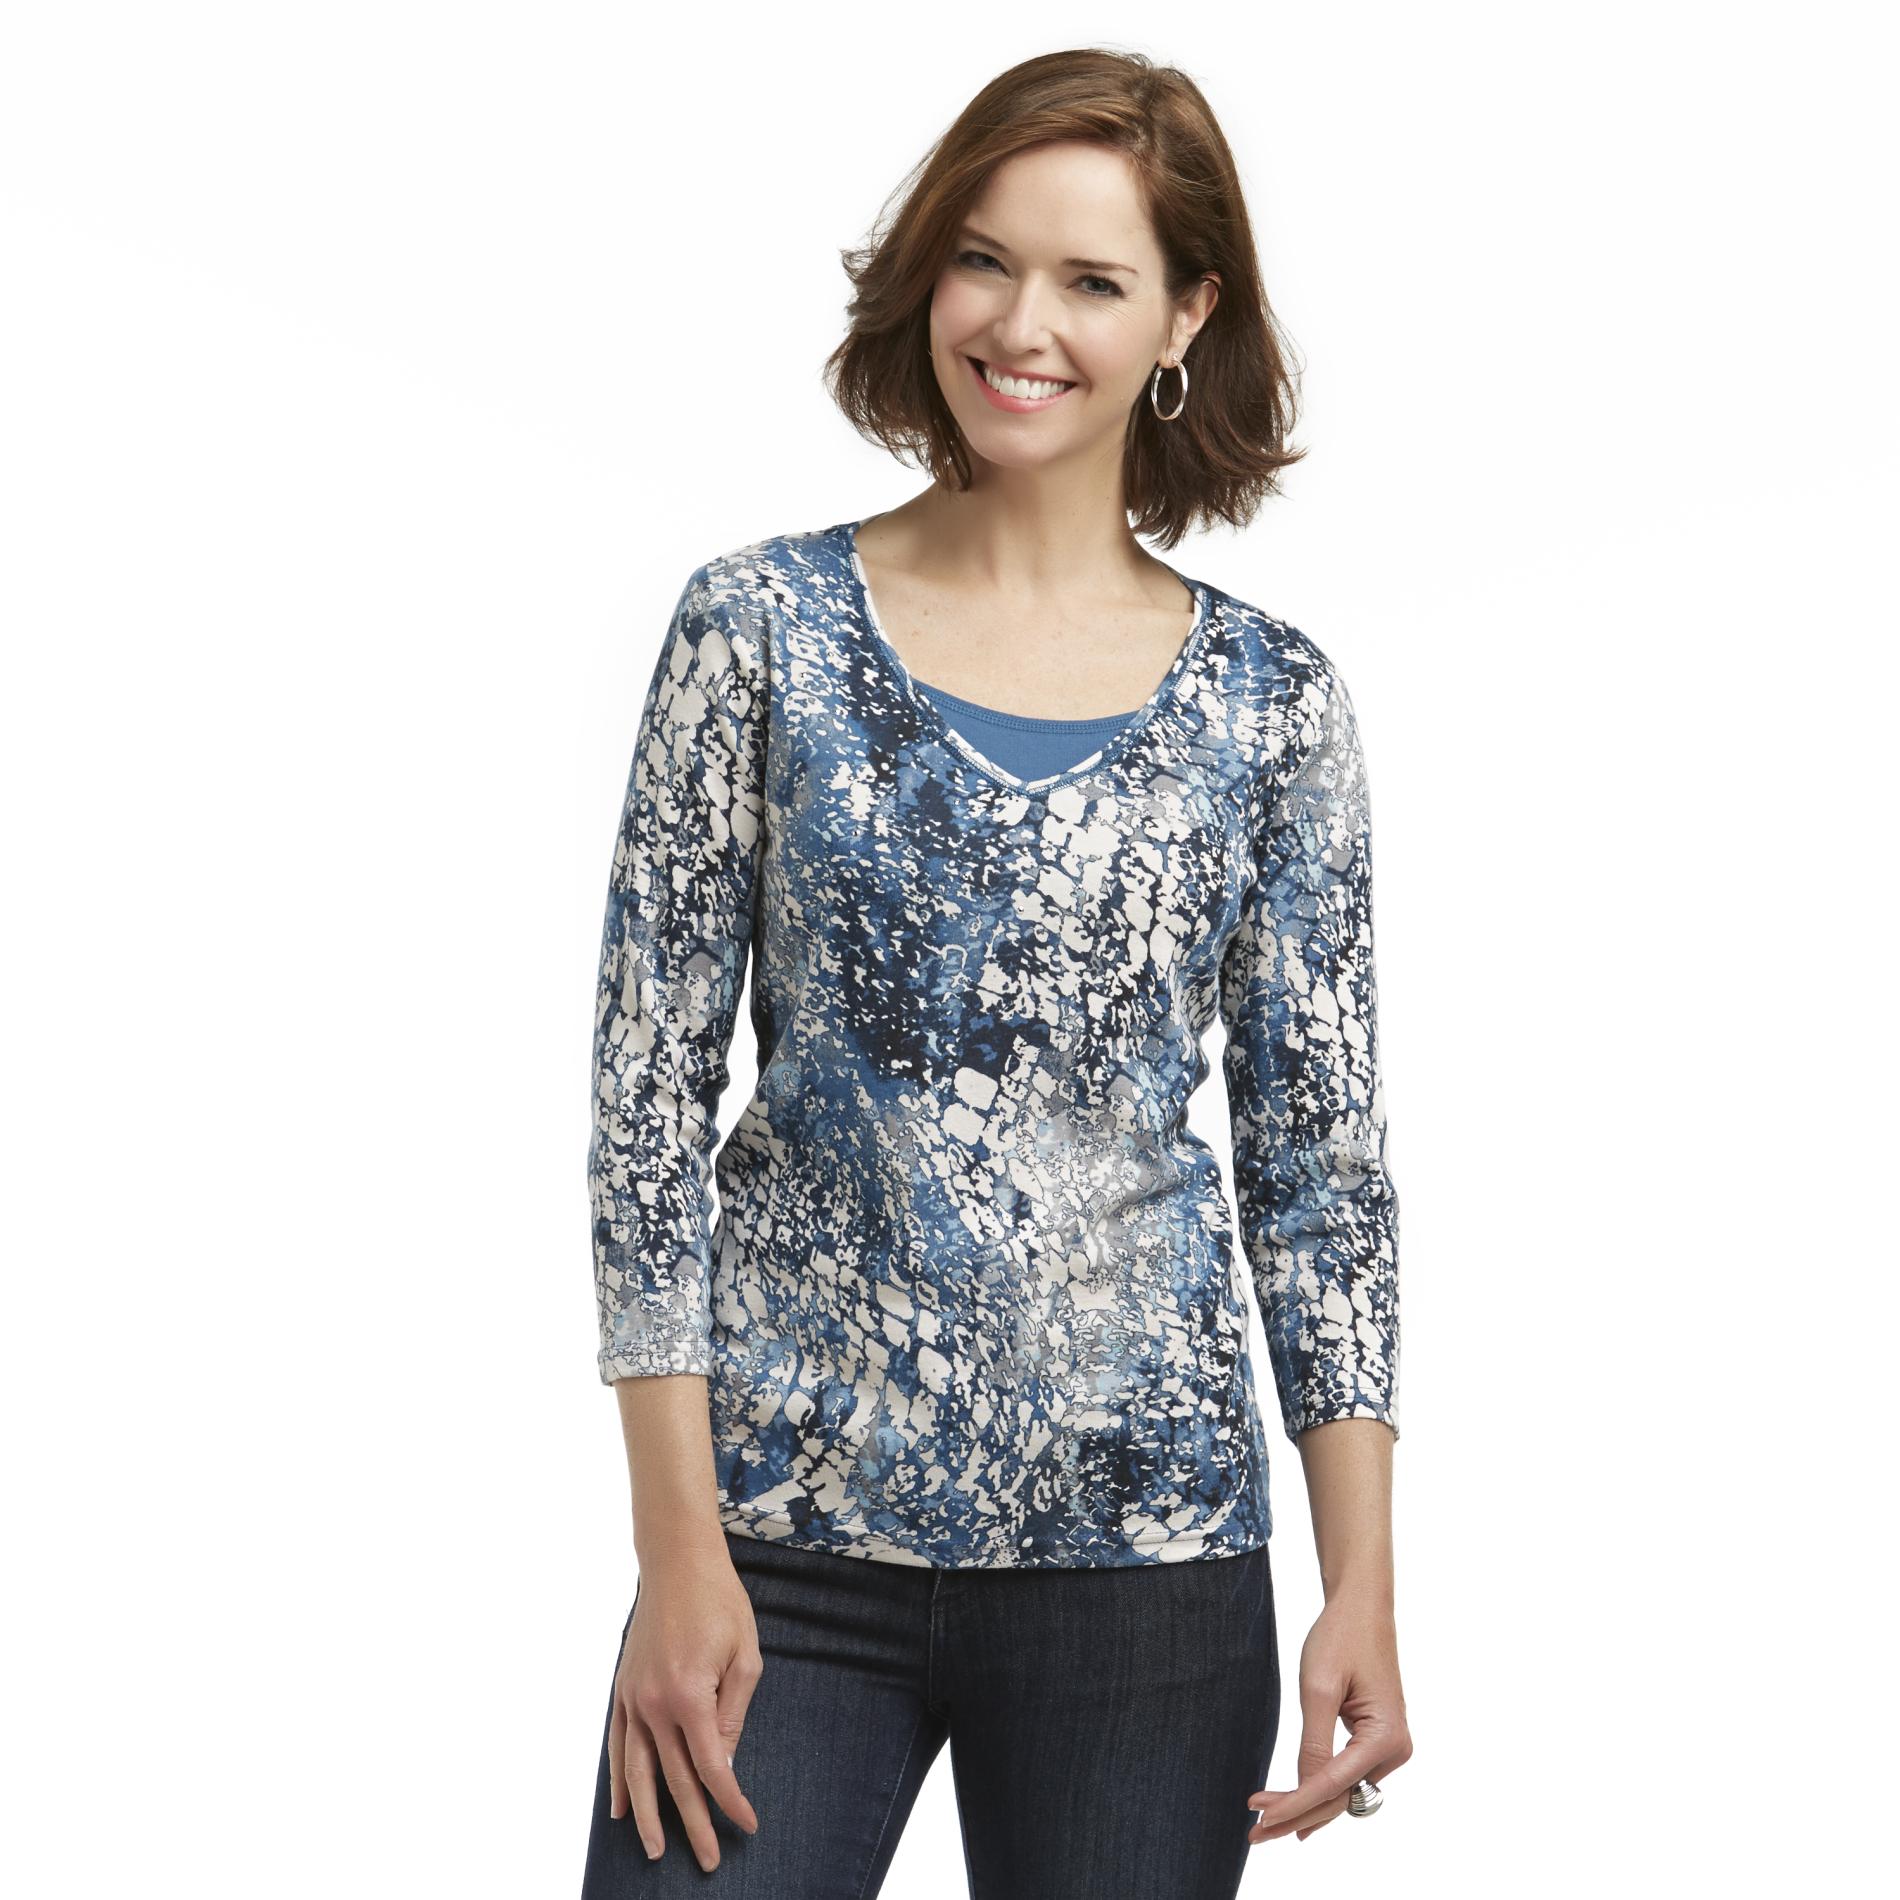 Basic Editions Women's Layered-Look Embellished Top - Abstract